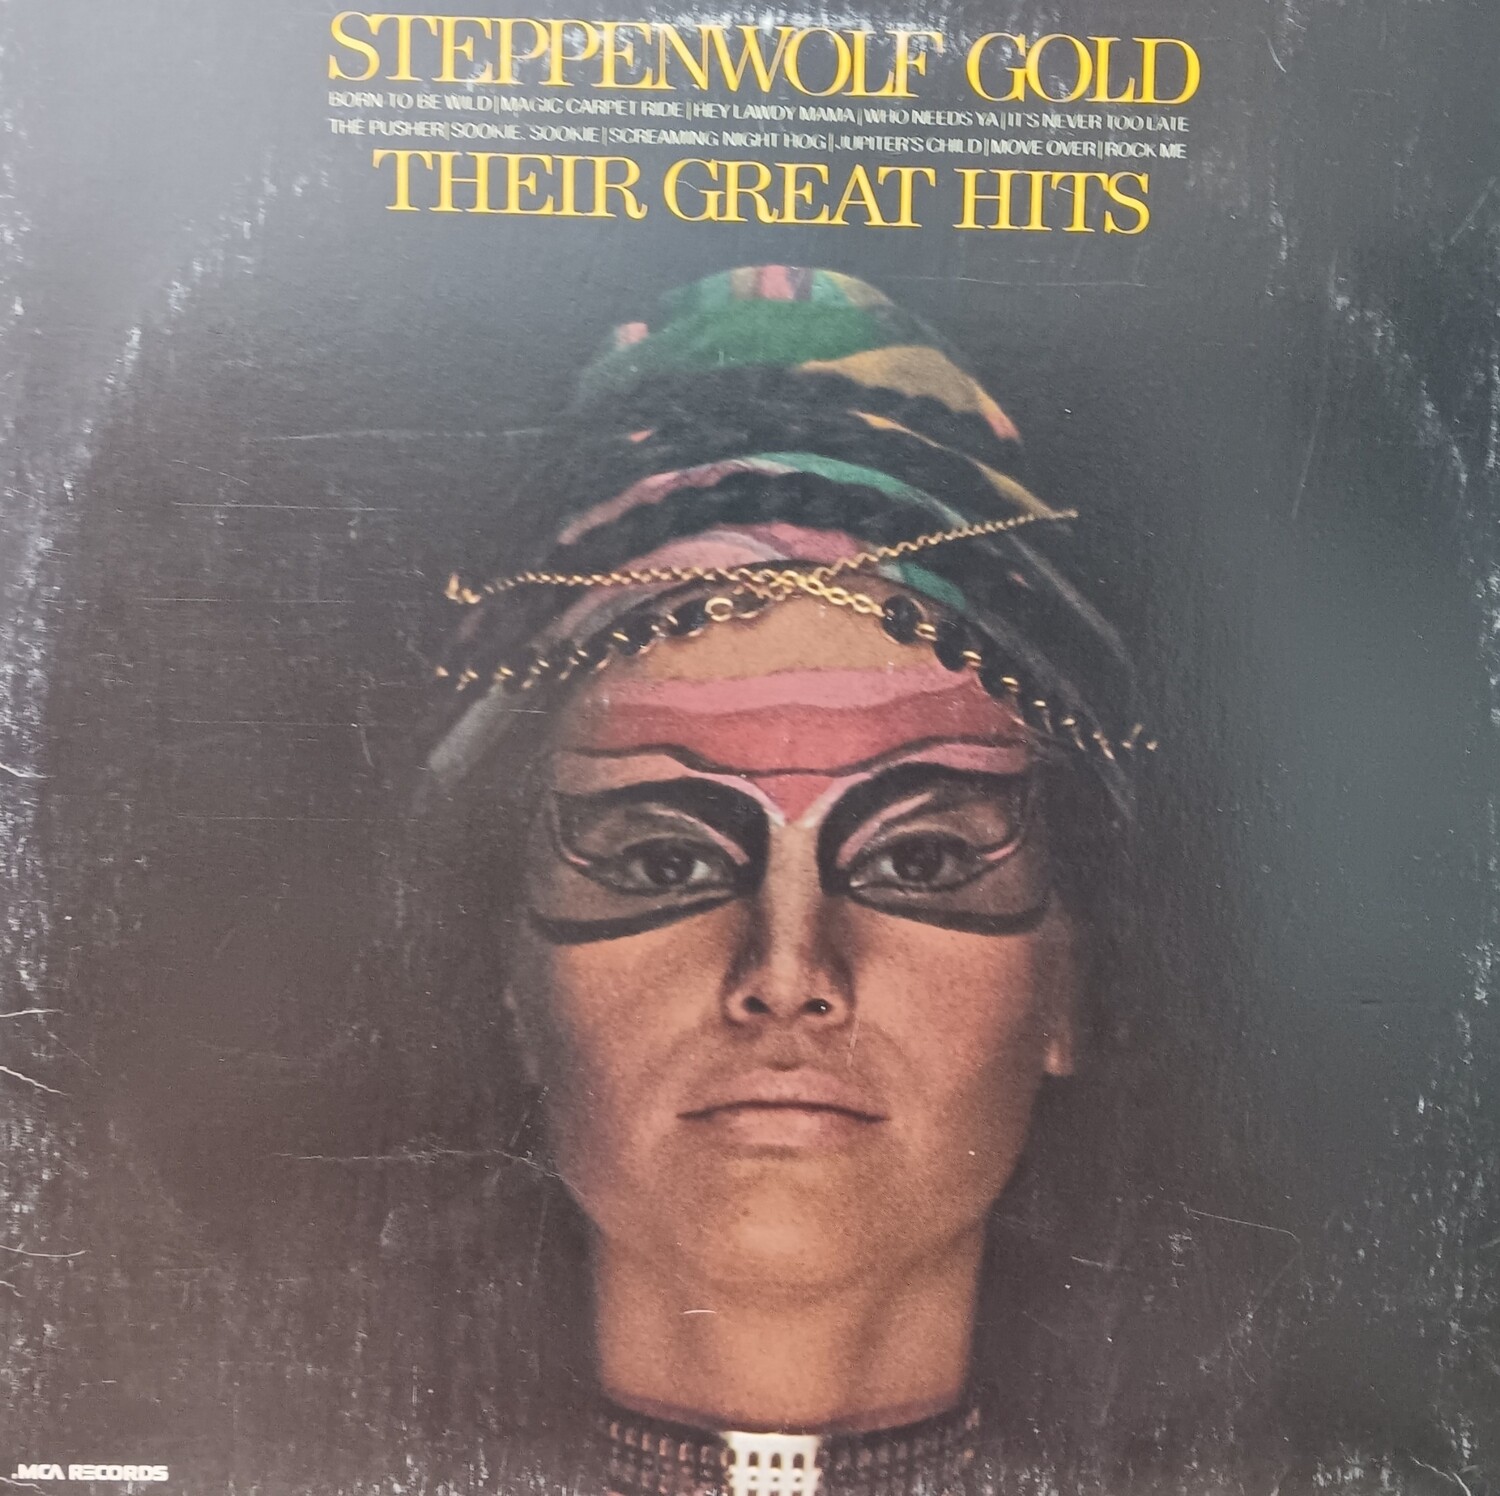 STEPPENWOLF - Their Greatest Hits